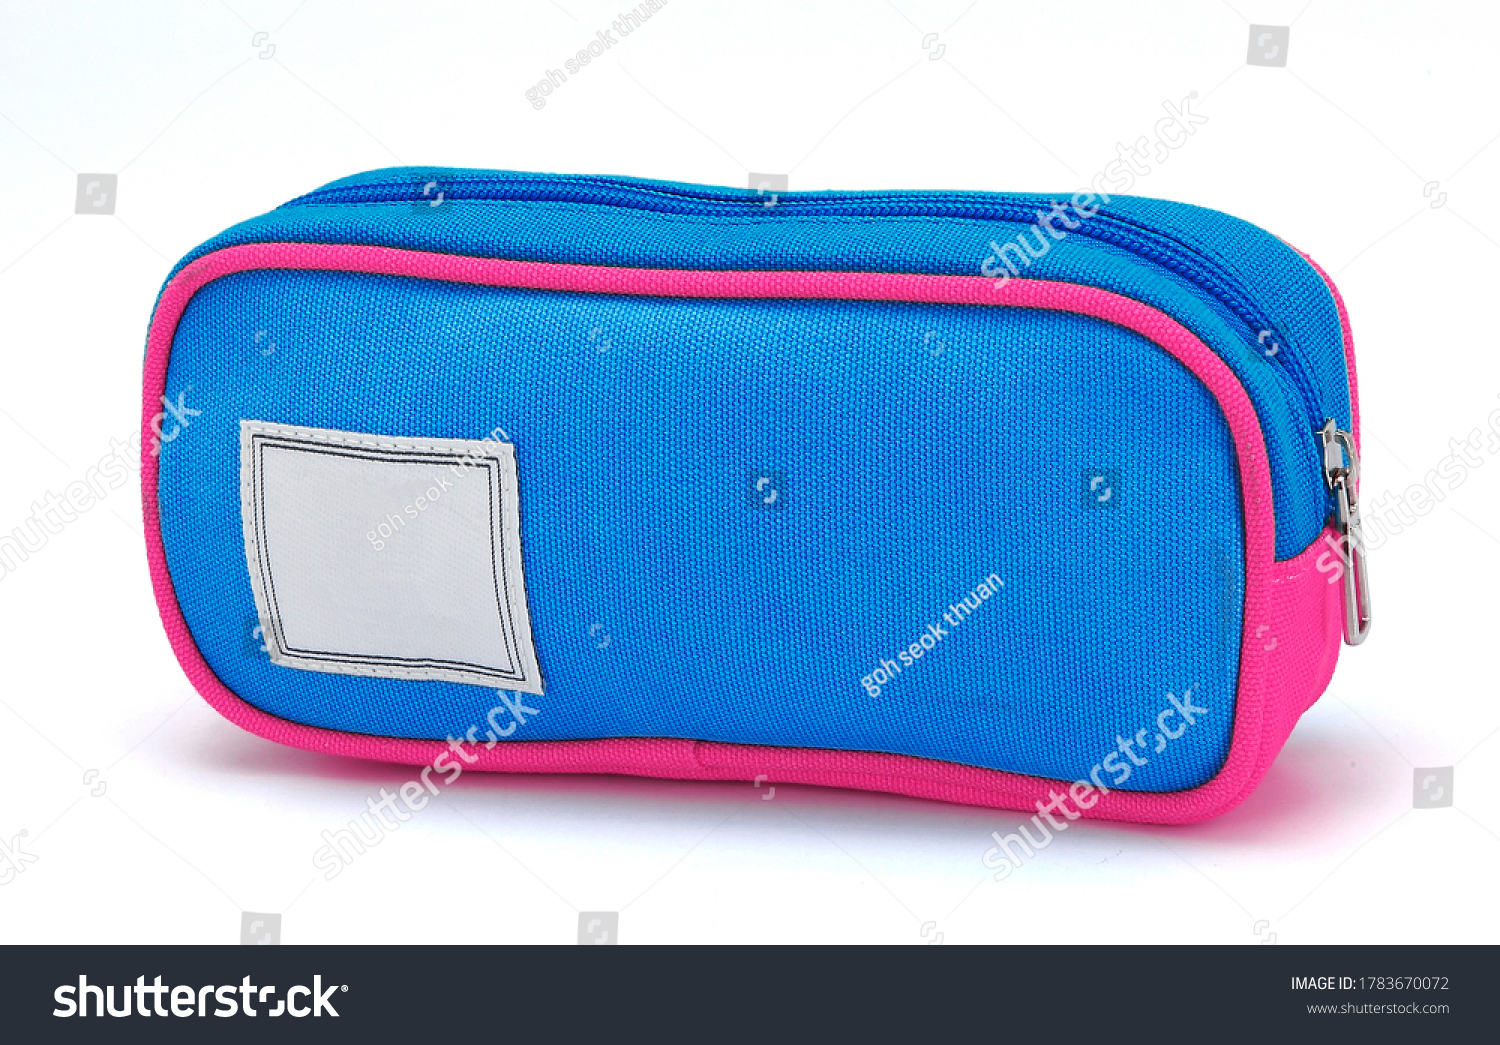 A pencil case or pencil box is a container used to store pencils. A pencil case can also contain a variety of other stationery such as sharpeners, pens, glue sticks, erasers, scissors, rulers .... #1783670072